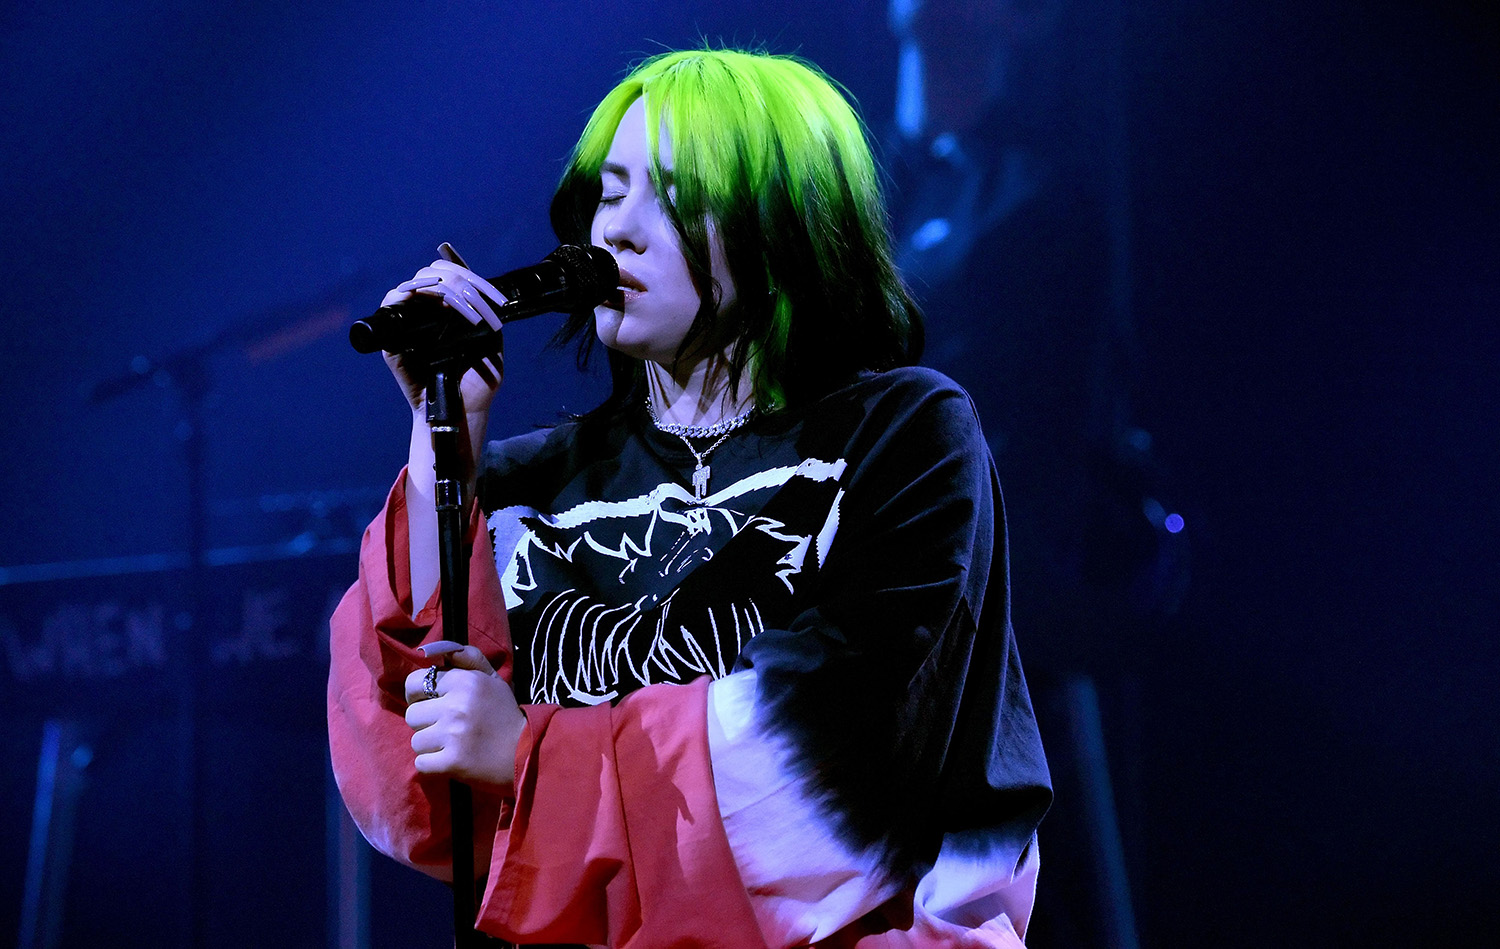 Billie Eilish performs at the 2021 iHeartRadio ALTer EGO Presented by Capital One stream